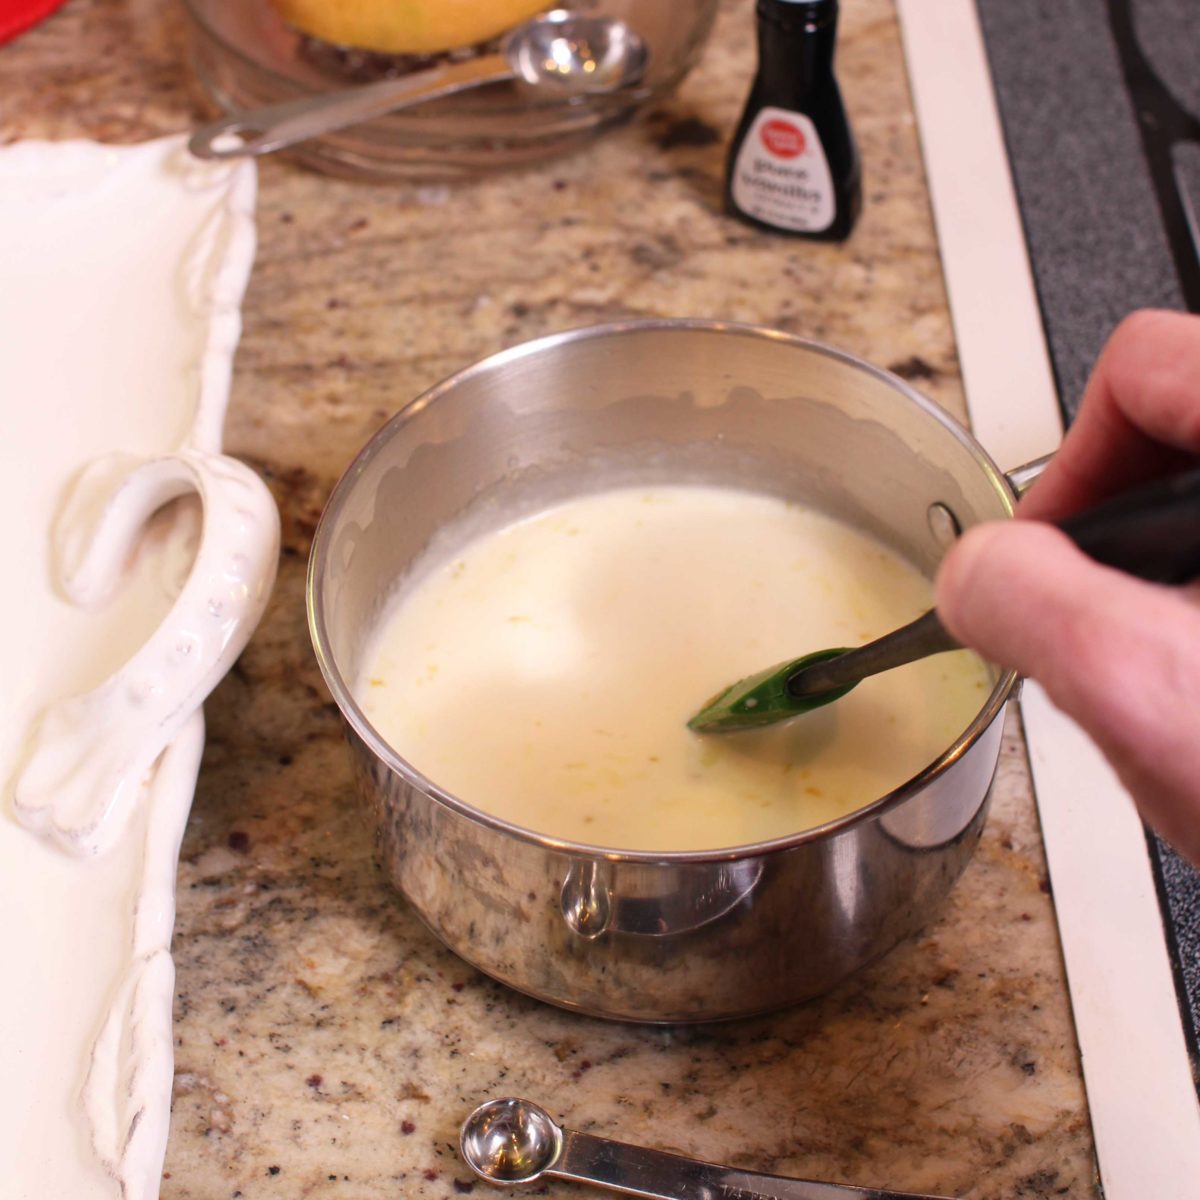 stirring a custard in a small silver saucepan next to a jar of vanilla extract.